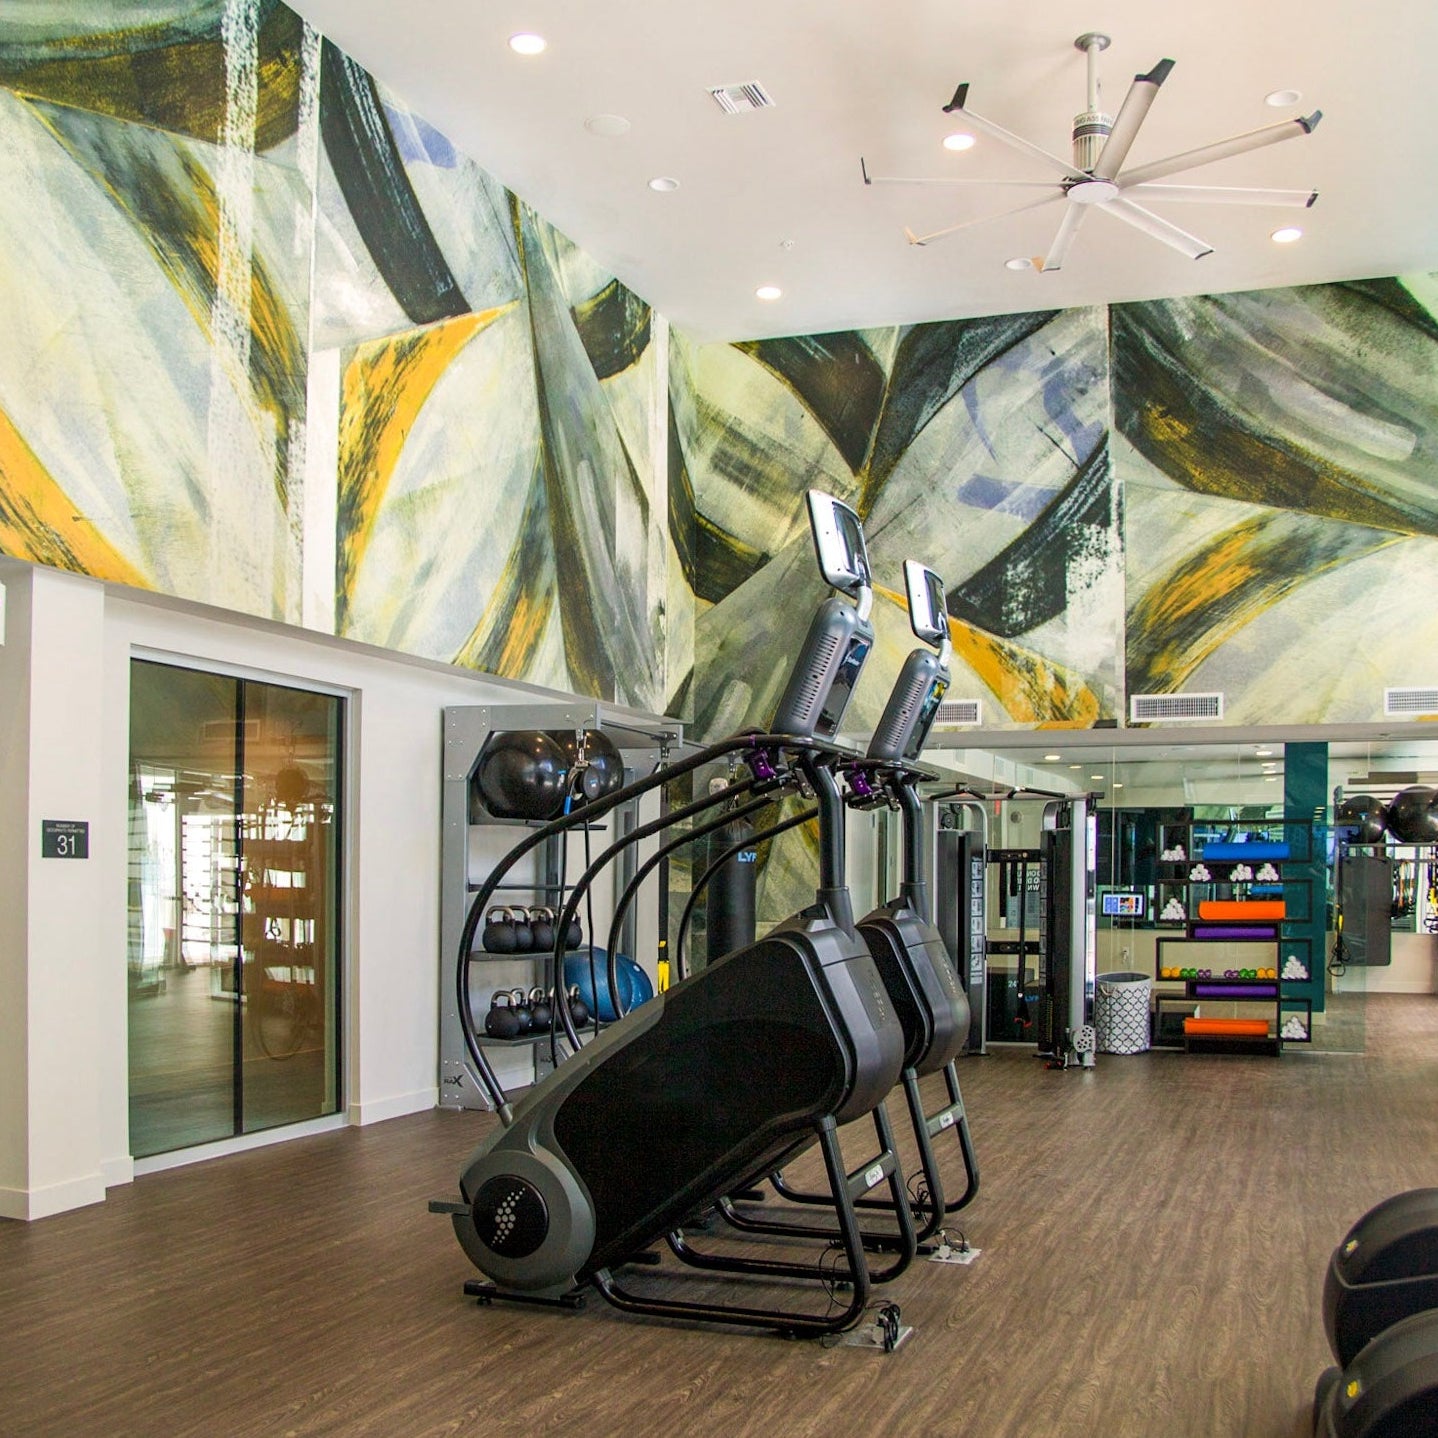 A modern gym at Next on Sixth Apartments featuring a custom abstract wall covering with dynamic geometric shapes in green, yellow, and black hues that enhance the contemporary vibe of the fitness area.